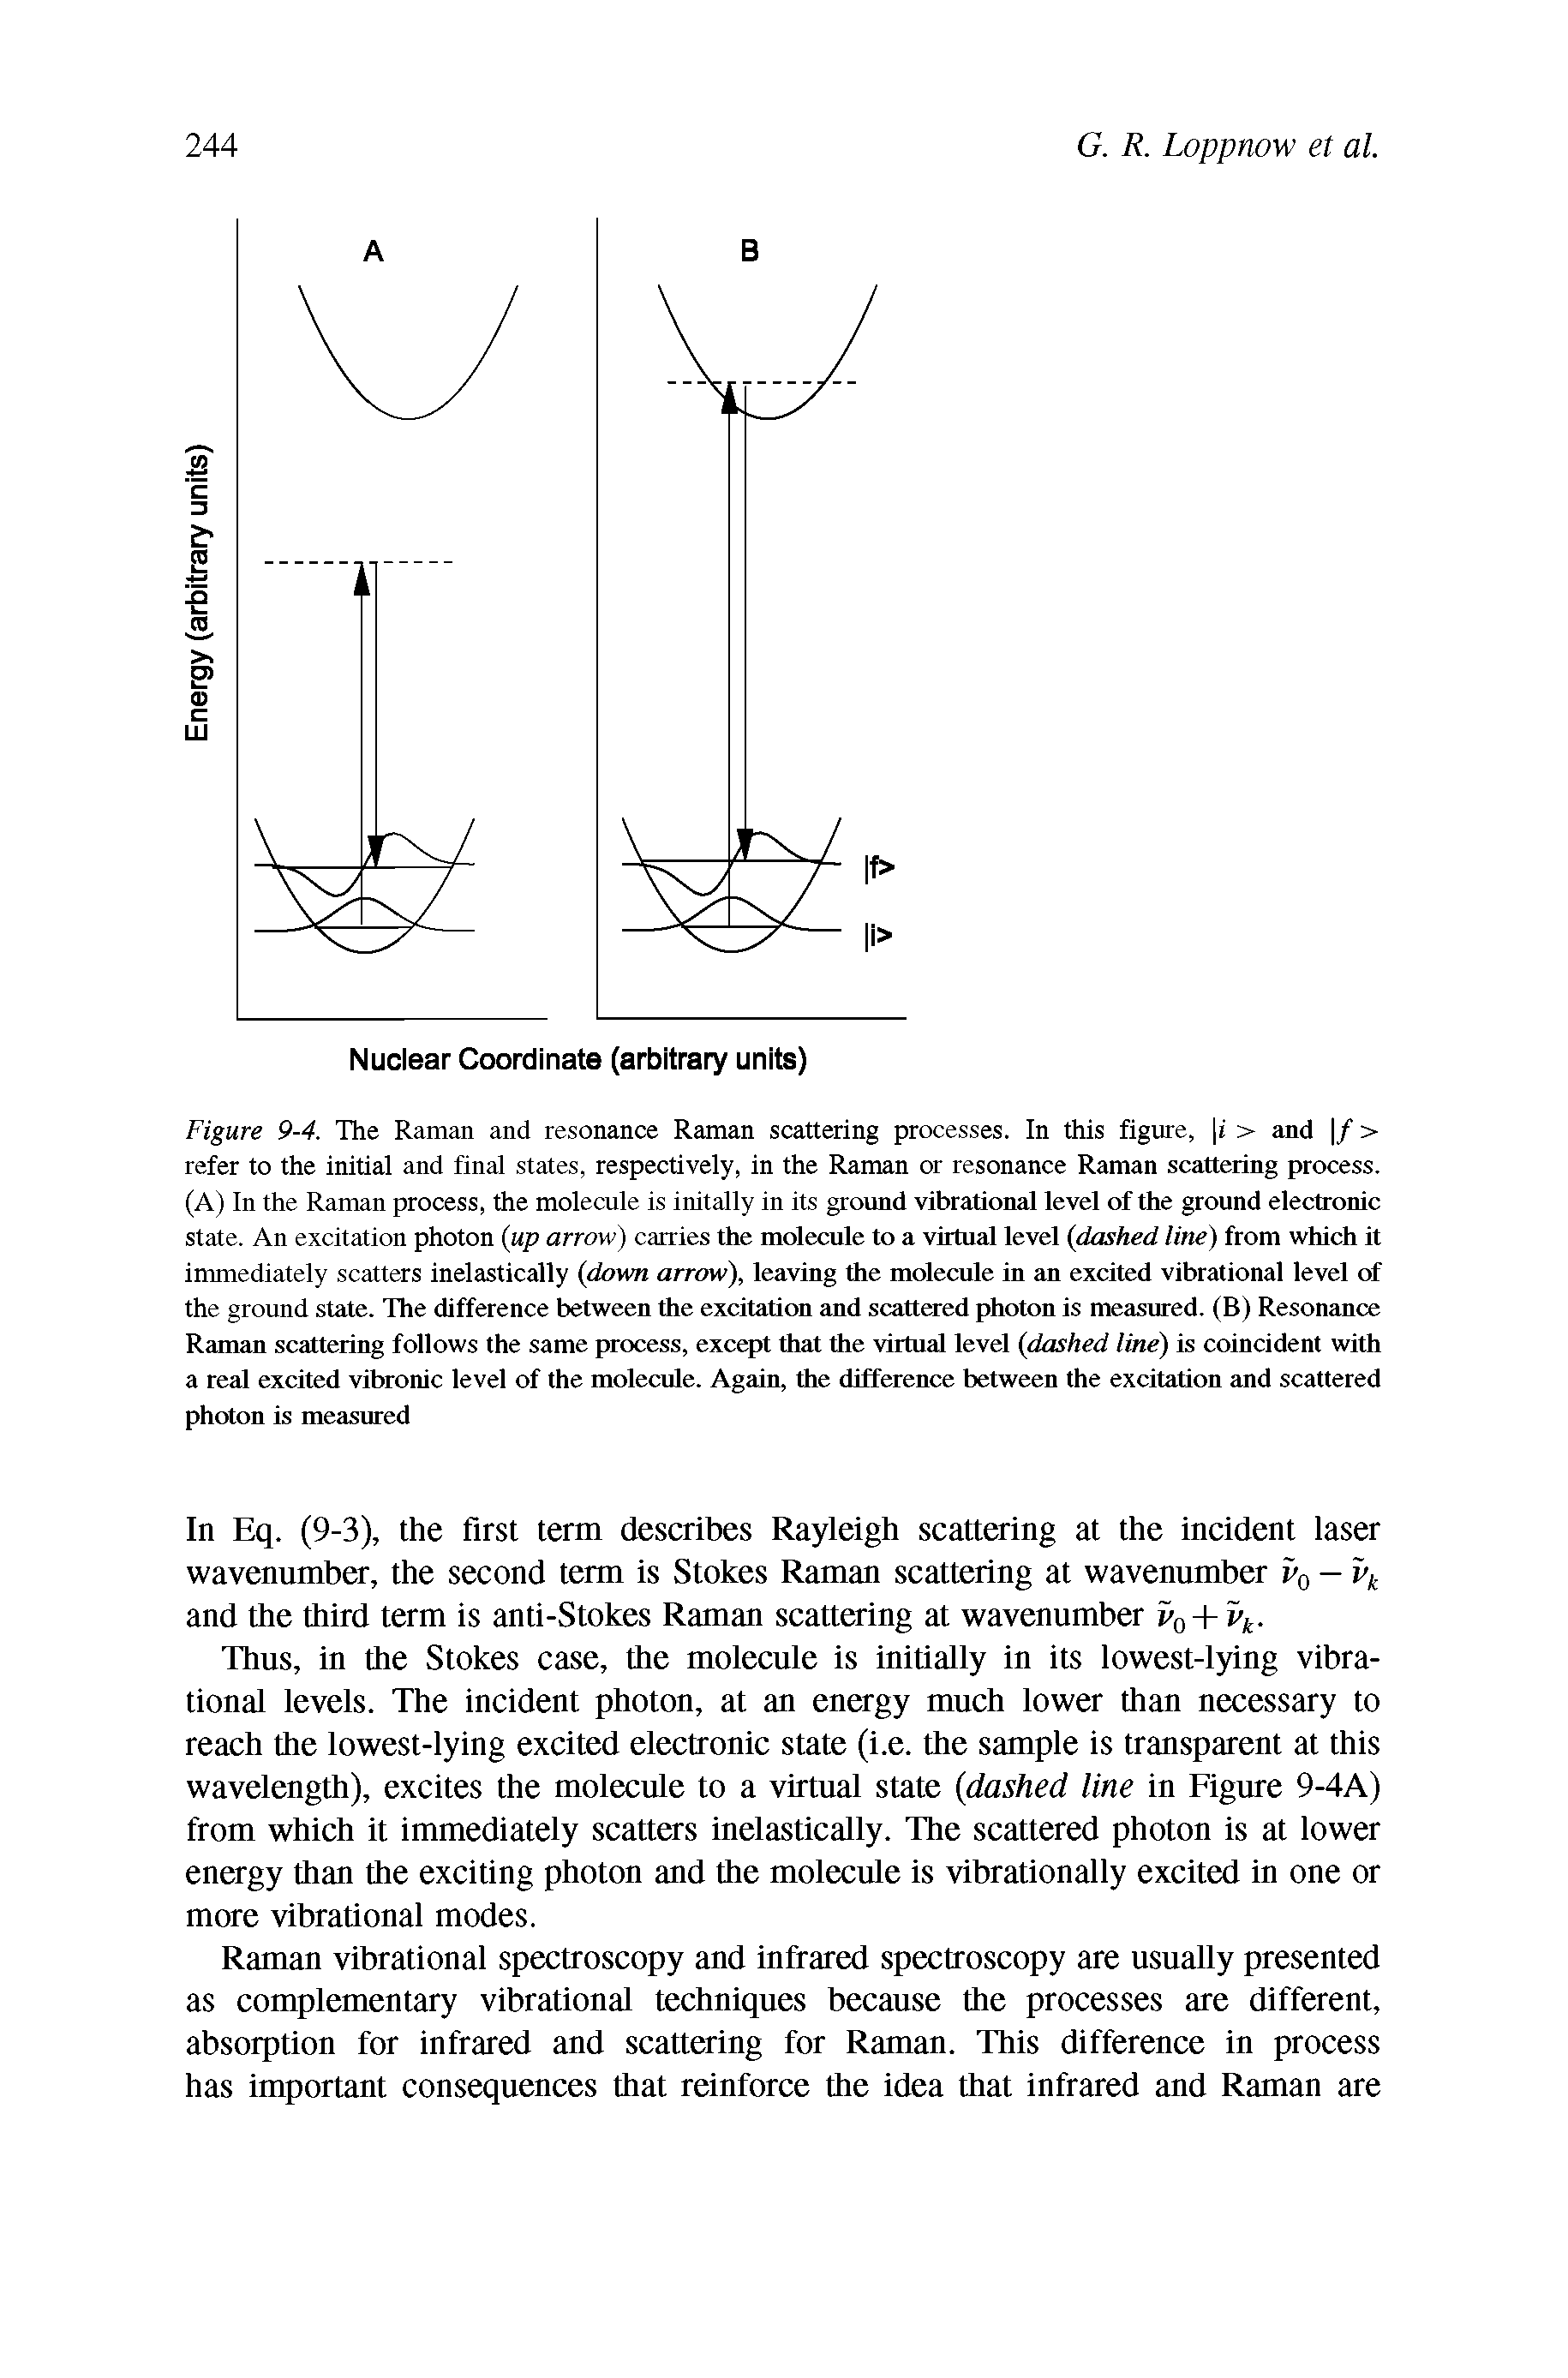 Figure 9-4. The Raman and resonance Raman scattering processes. In this figure, i > and f > refer to the initial and final states, respectively, in the Raman or resonance Raman scattering process. (A) In the Raman process, the molecule is initally in its ground vibrational level of the ground electronic state. An excitation photon (up arrow) carries the molecule to a virtual level (dashed line) from which it immediately scatters inelastically (down arrow), leaving die molecule in an excited vibrational level of the ground state. The difference between die excitation and scattered photon is measured. (B) Resonance Raman scattering follows the same process, except that die virtual level (dashed line) is coincident with a real excited vibronic level of the molecule. Again, die difference between the excitation and scattered photon is measured...